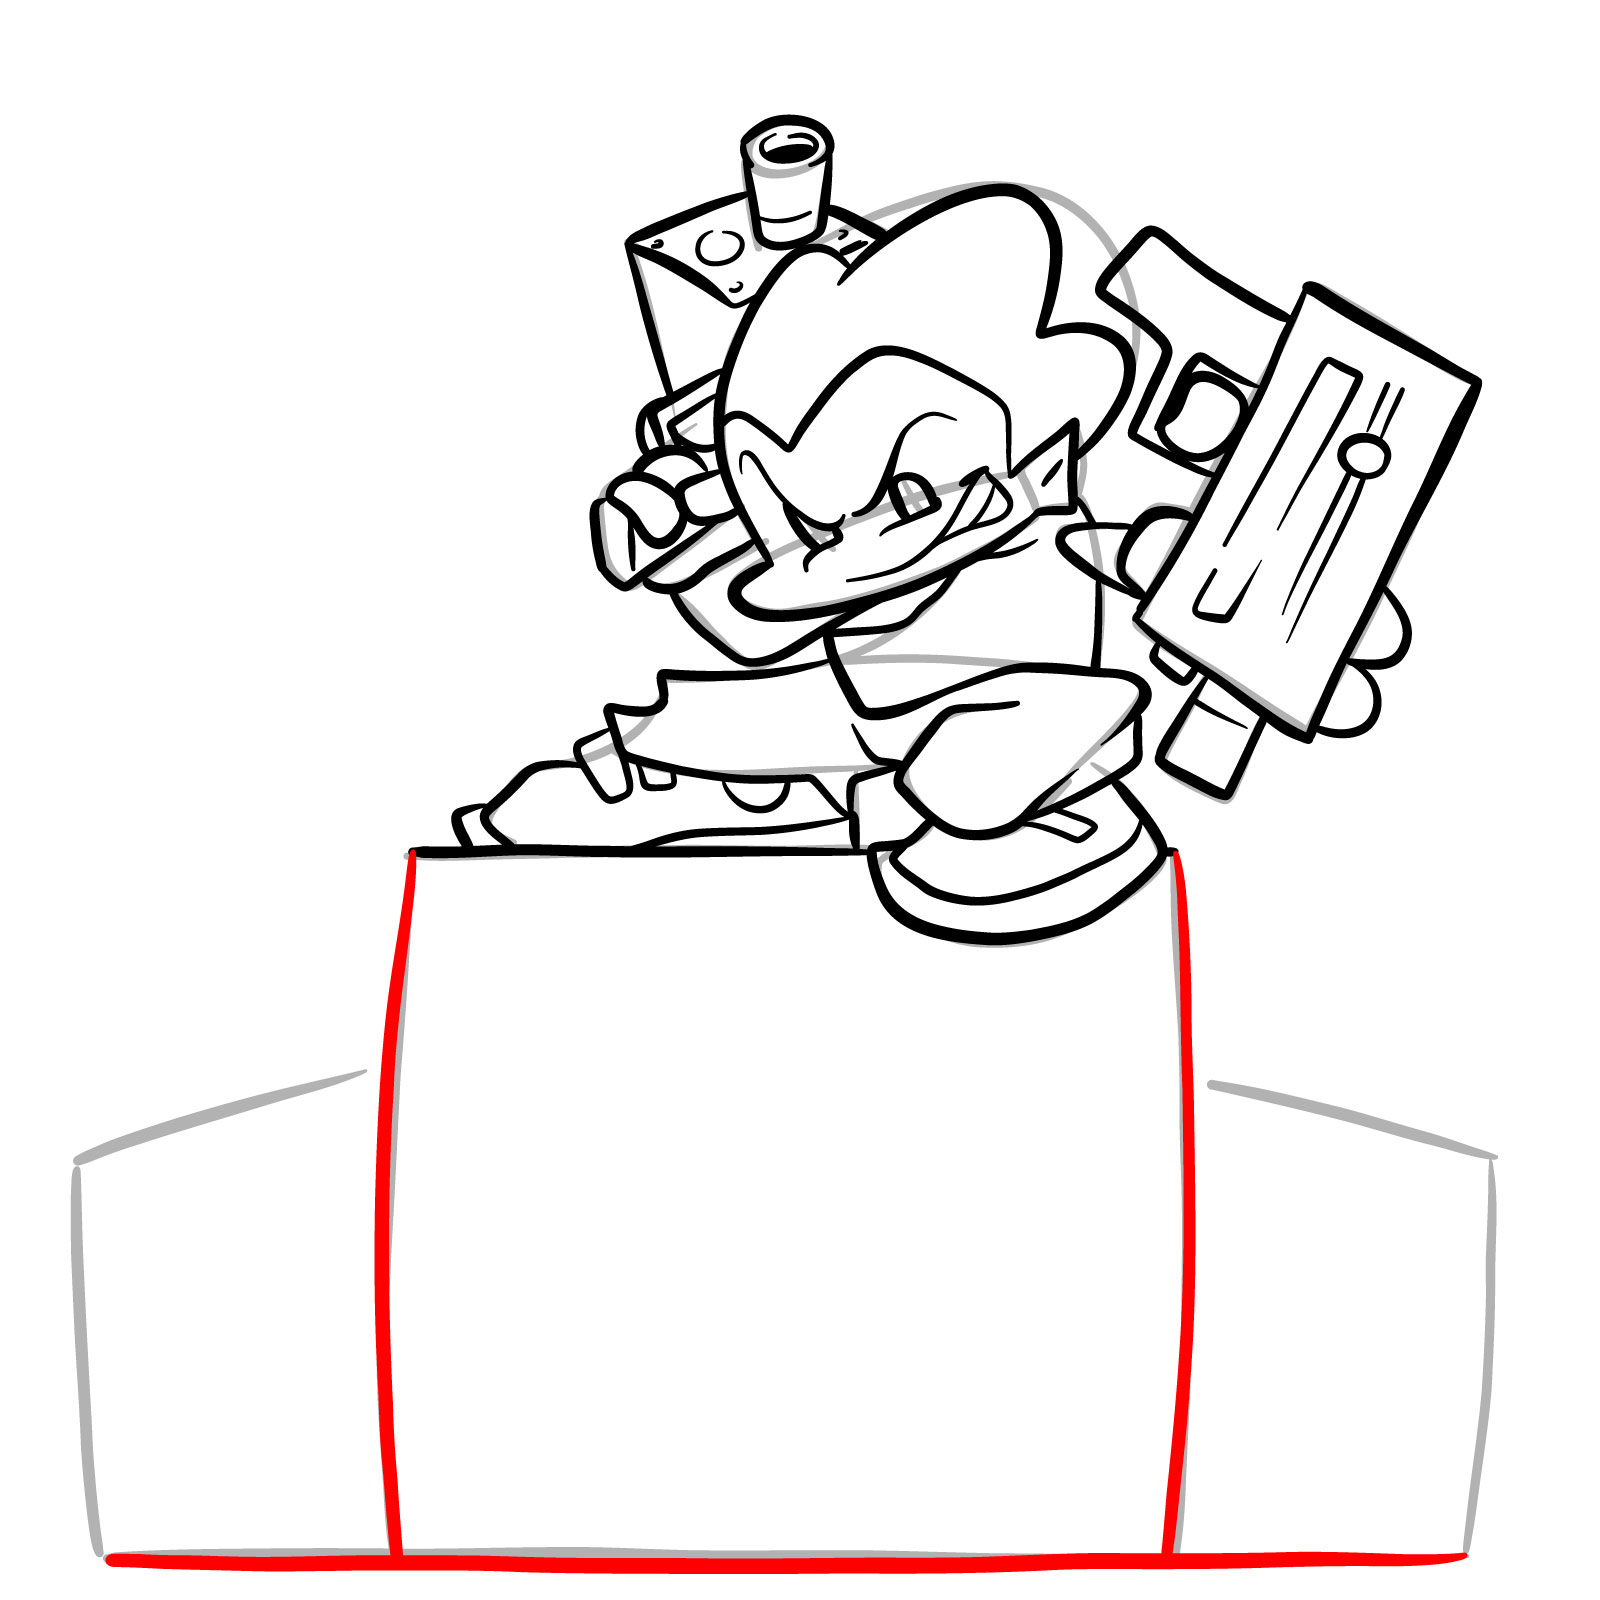 How to draw Pico on the speakers - step 26